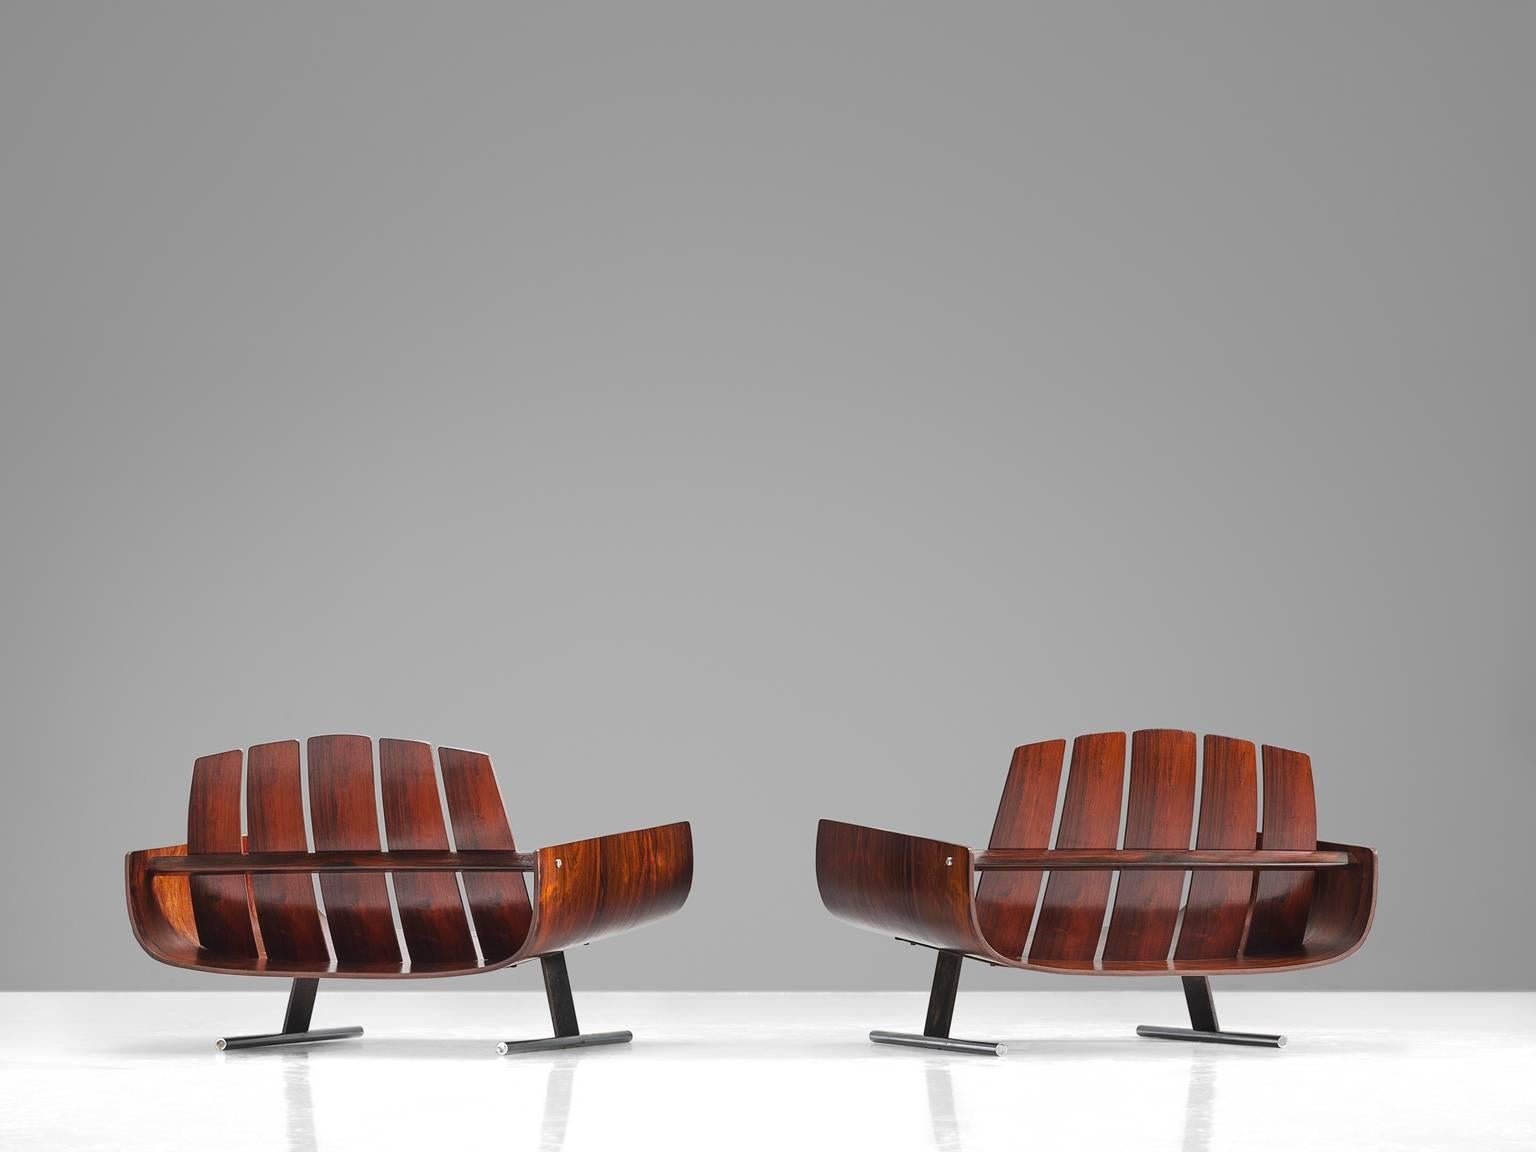 Set of two 'Presidential' lounge chairs, in rosewood and metal, bu Jorge Zalszupin for L'Atelier, Brazil, 1959-1965.

A pair of two slipper lounge chairs by Brazilian designer Jorge Zalszupin. Zalszupin was a Pioneer in the use of bentwood in his